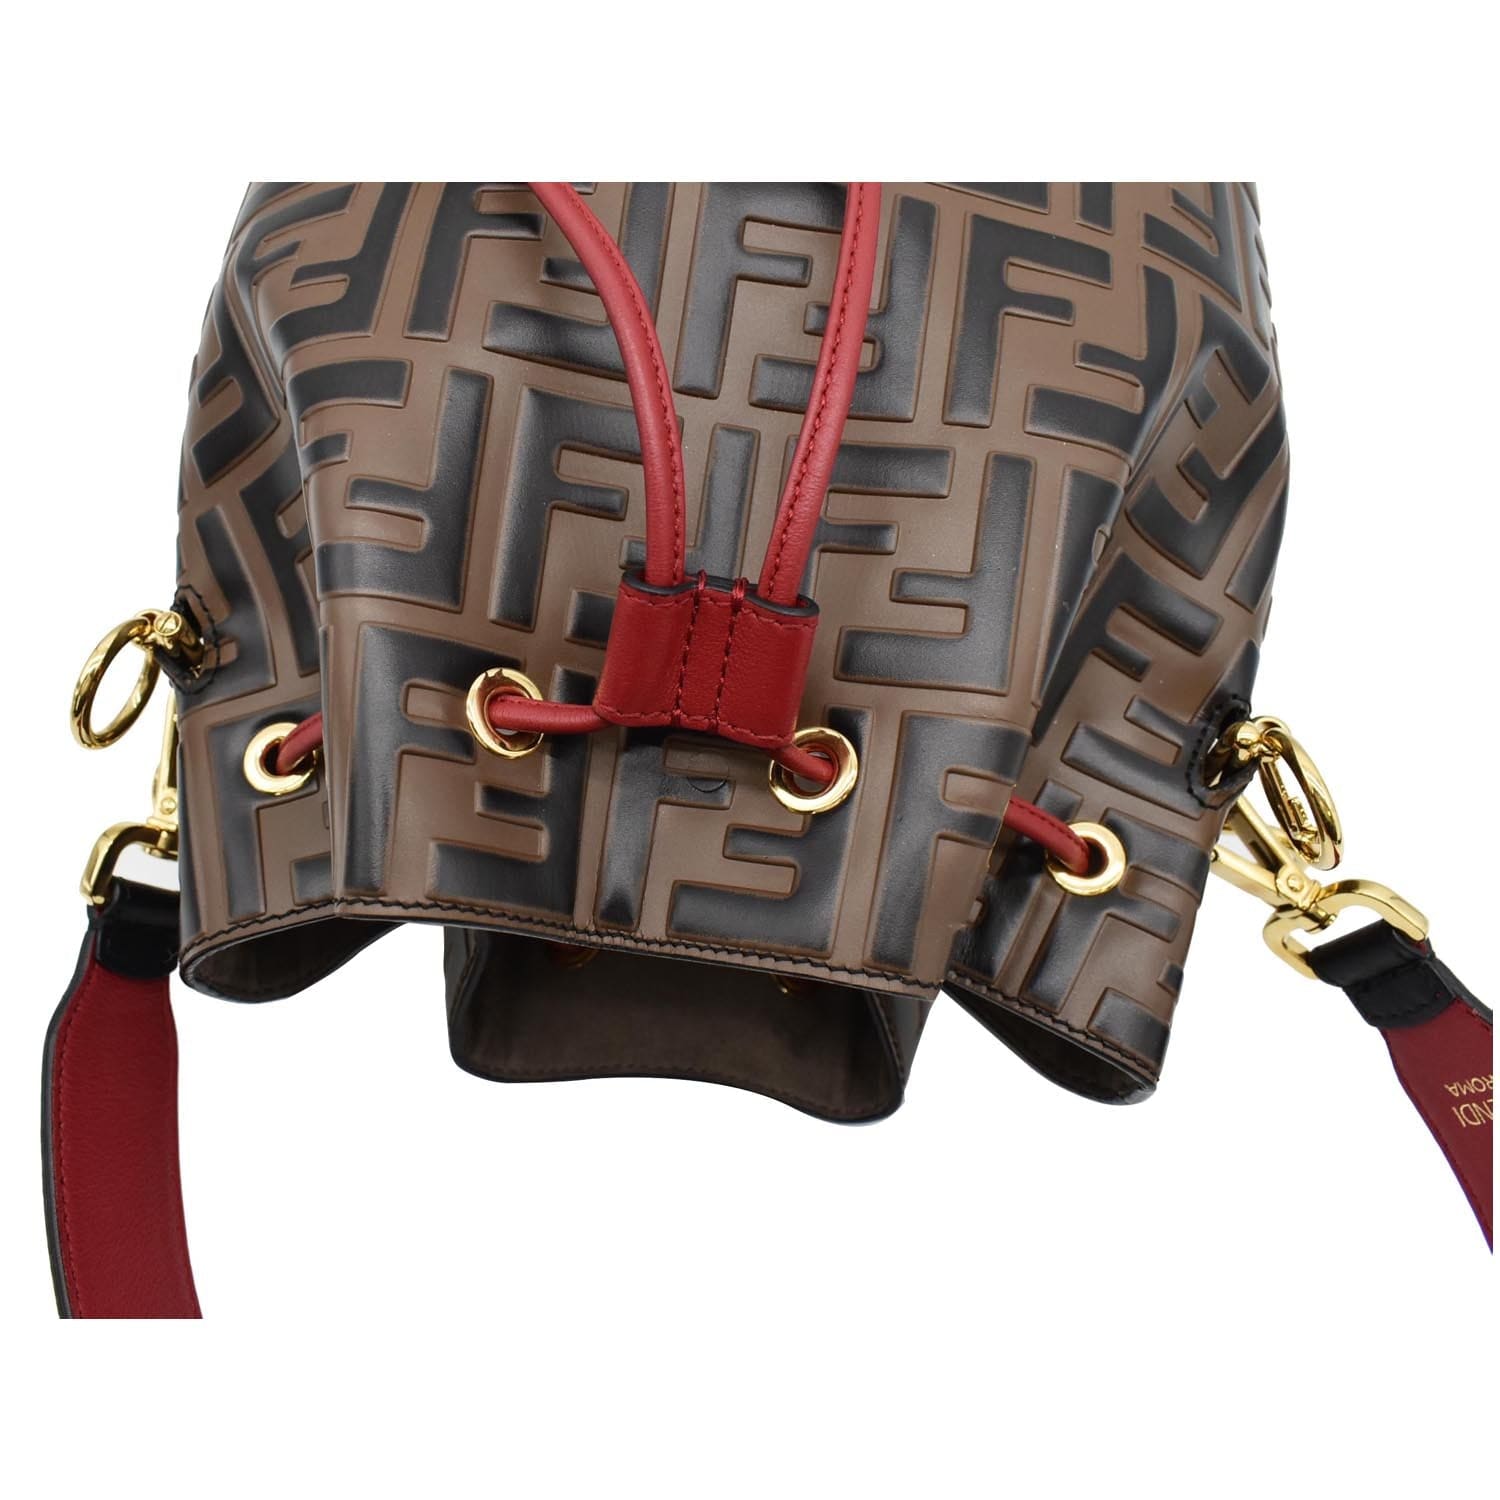 Garderobe - Fendi Brown/Black FF Mon Tresor Mini Drawstring Bucket Bag For  AED4,747/- Available Online and in Store DM us to Purchase Choose PostPay  at Checkout #garderobe #garderobedubai #fendi #luxurybags #luxury #preloved  #